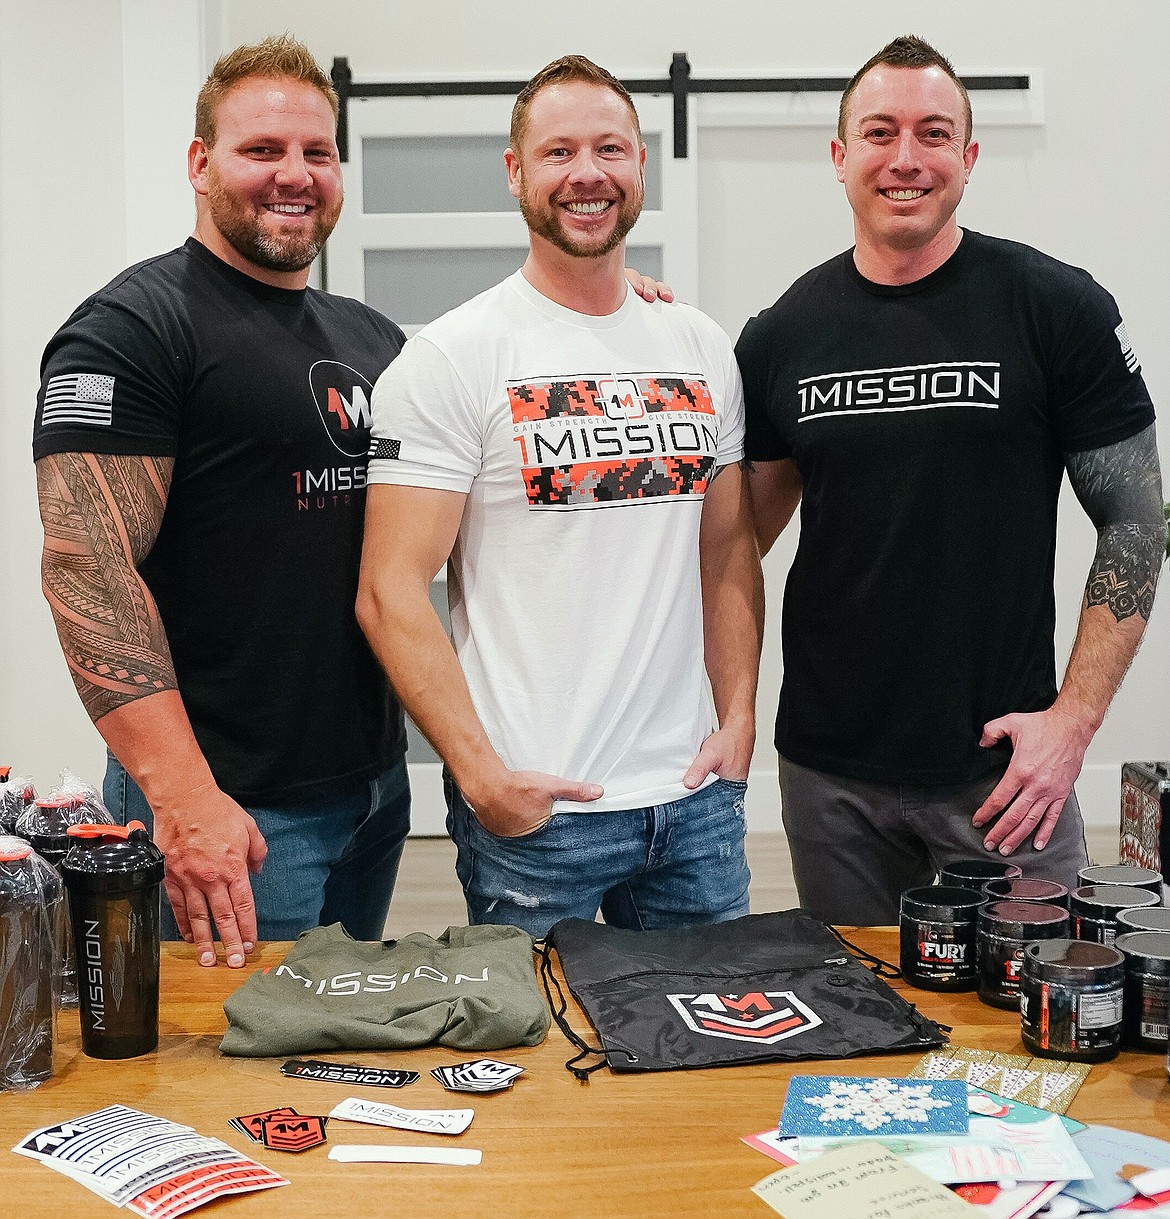 FROM LEFT are Keaton Hoskins, Greg Riska and Jesse Corbett of 1Mission Nutrition. (Photo provided)